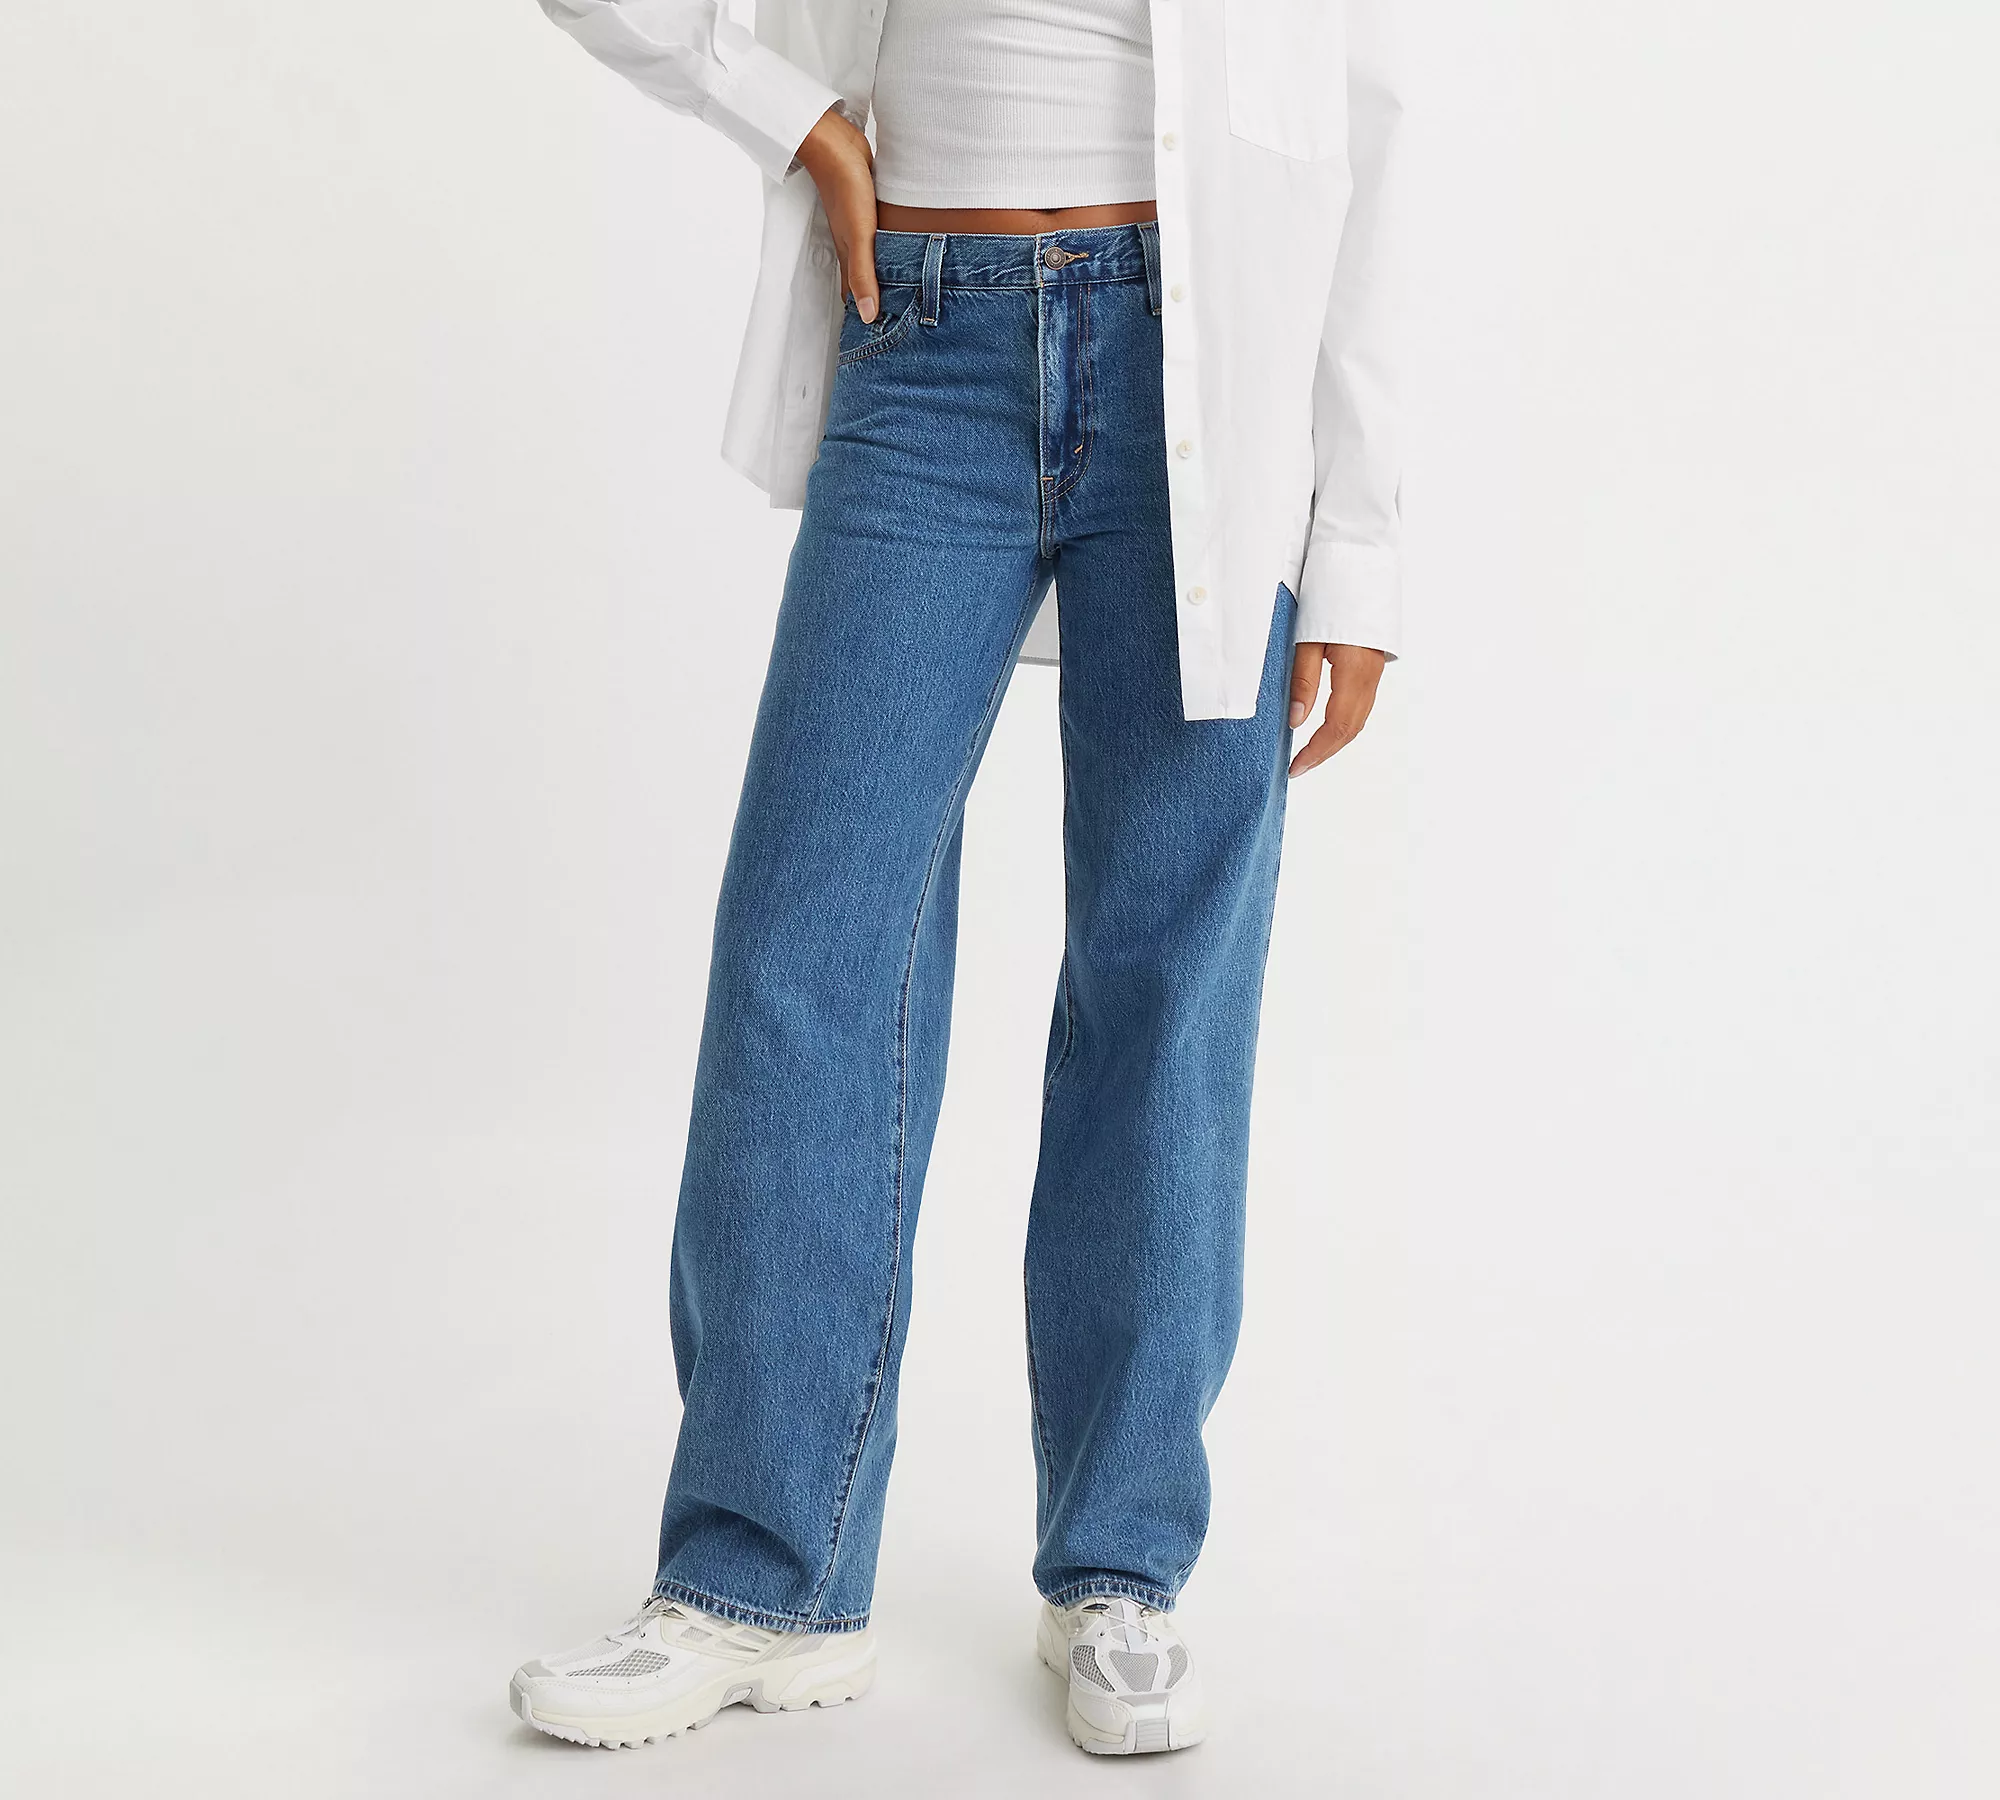 Levi Strauss & Co. Baggy Dad, Hold My Purse